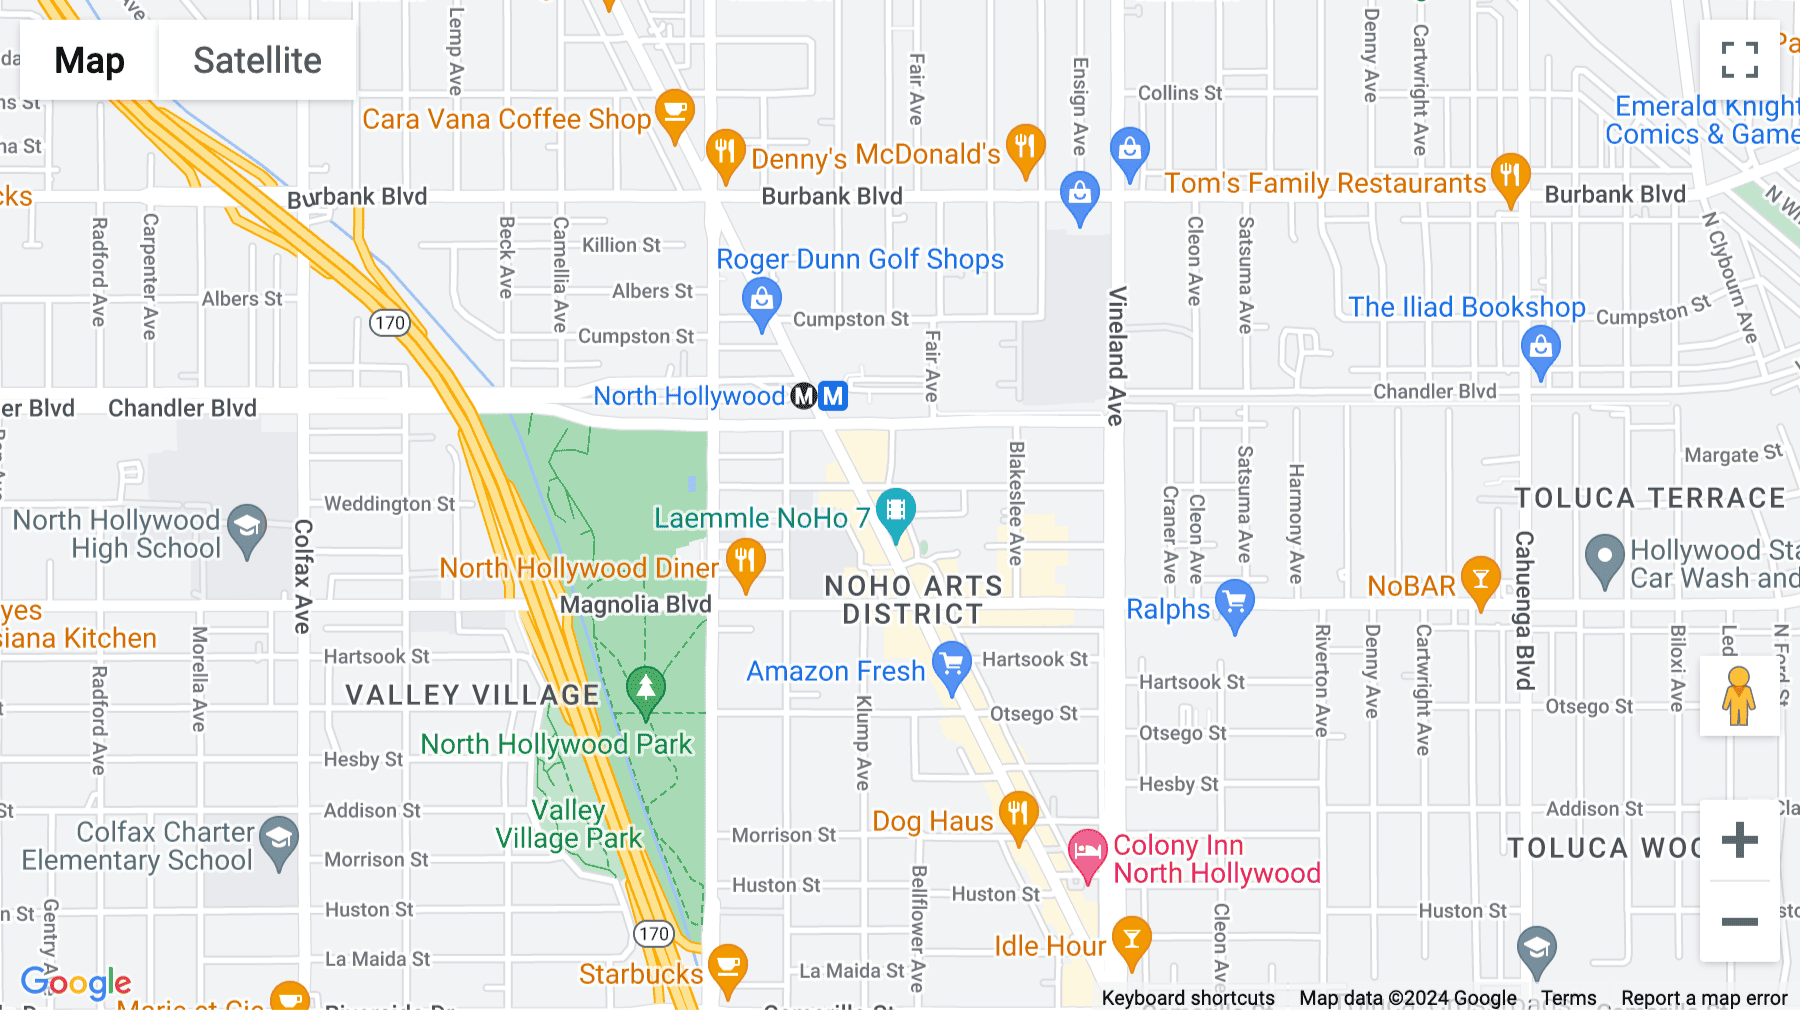 Click for interative map of 5250 N. Lankershim Blvd, Suite 550, North Hollywood, Los Angeles, Los Angeles